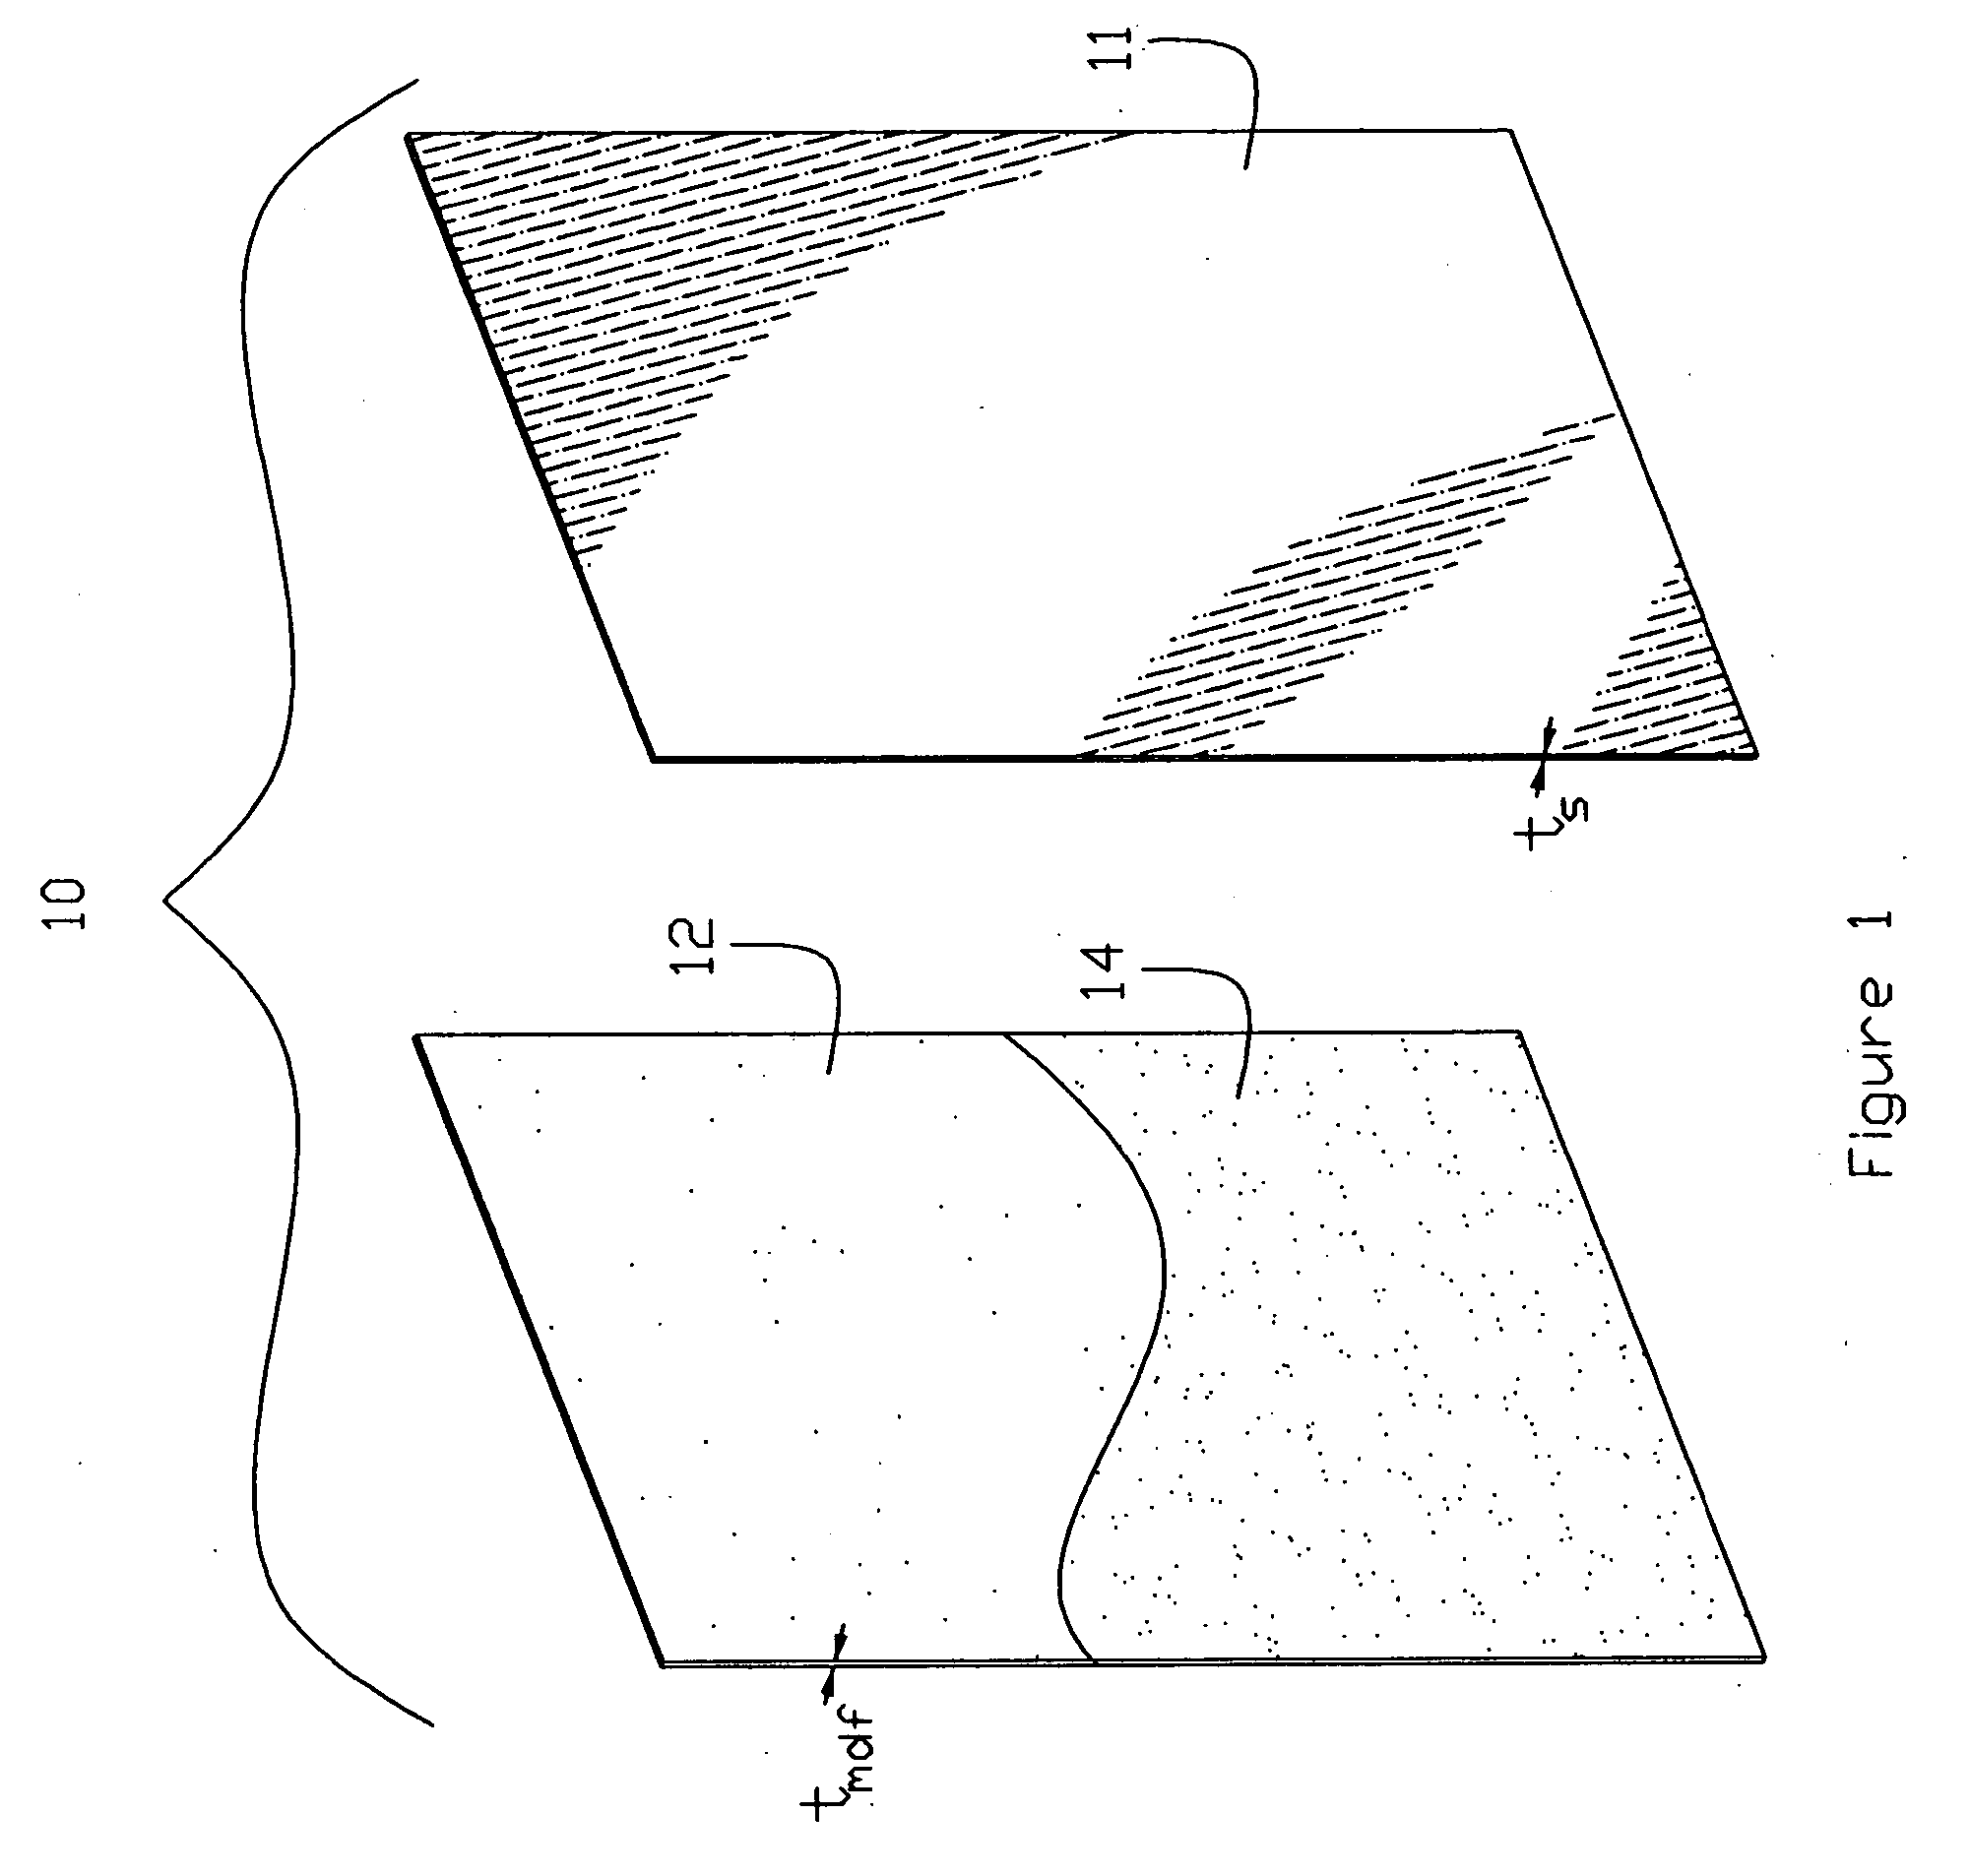 Method of framing a building shear wall structure compatible with conventional interior or exterior finishing materials and subsurface panel for use therewith